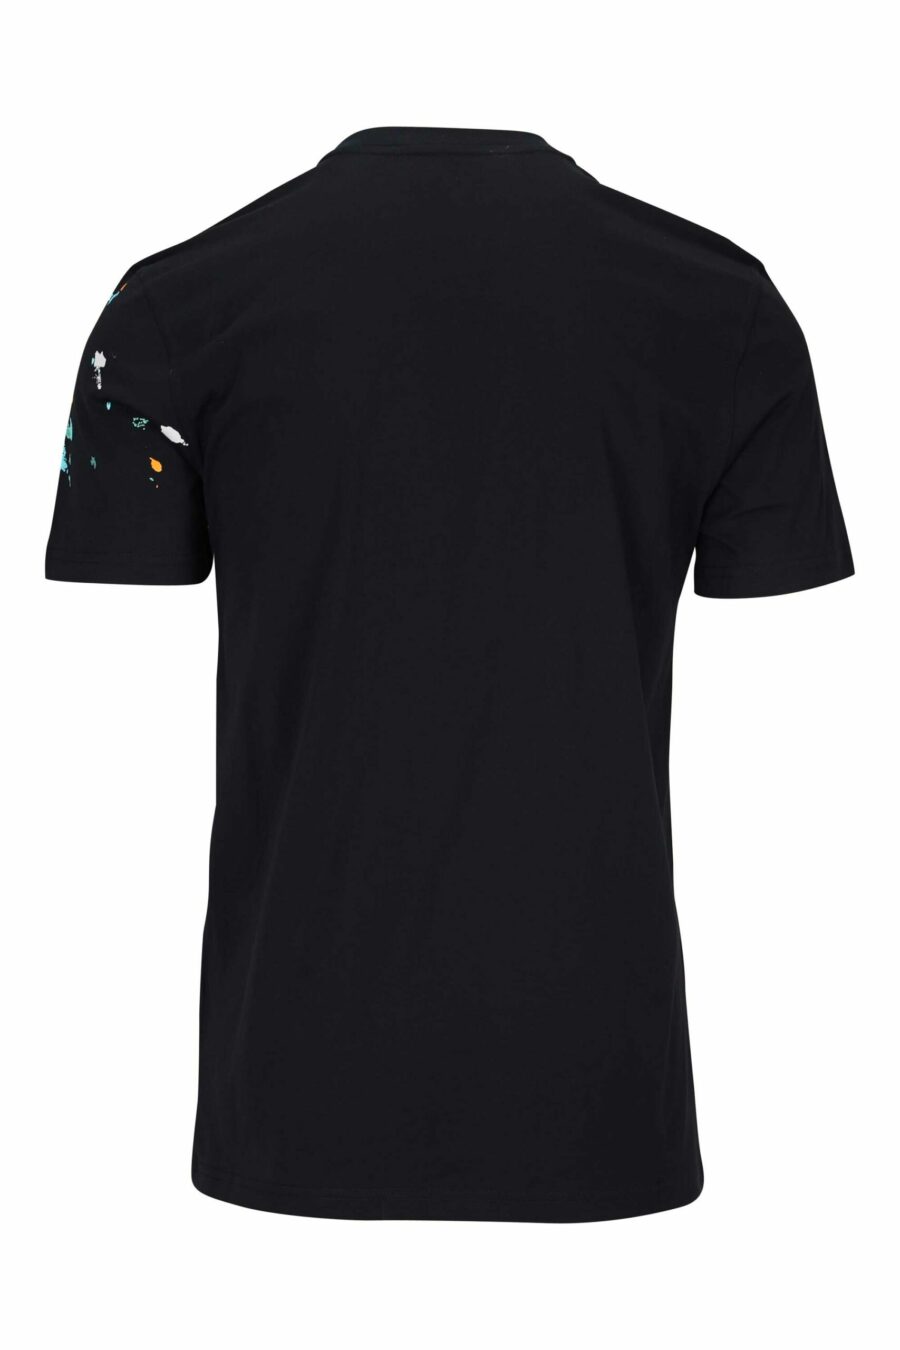 Black T-shirt with maxilogo "couture milano" with multicoloured "splash" - 667113391946 1 scaled